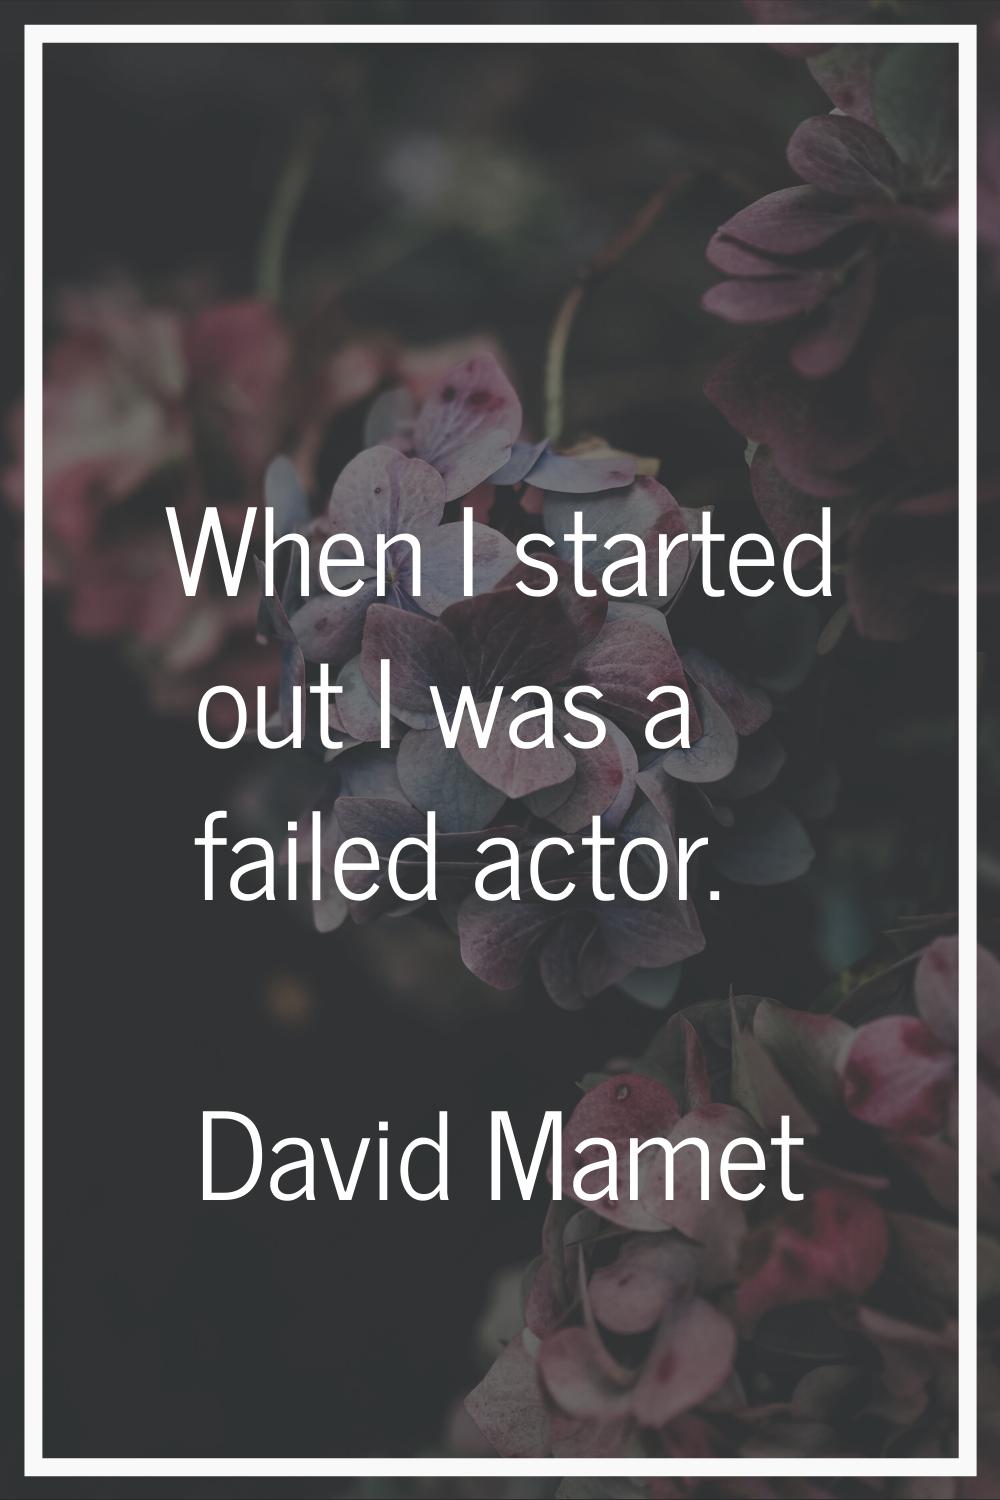 When I started out I was a failed actor.